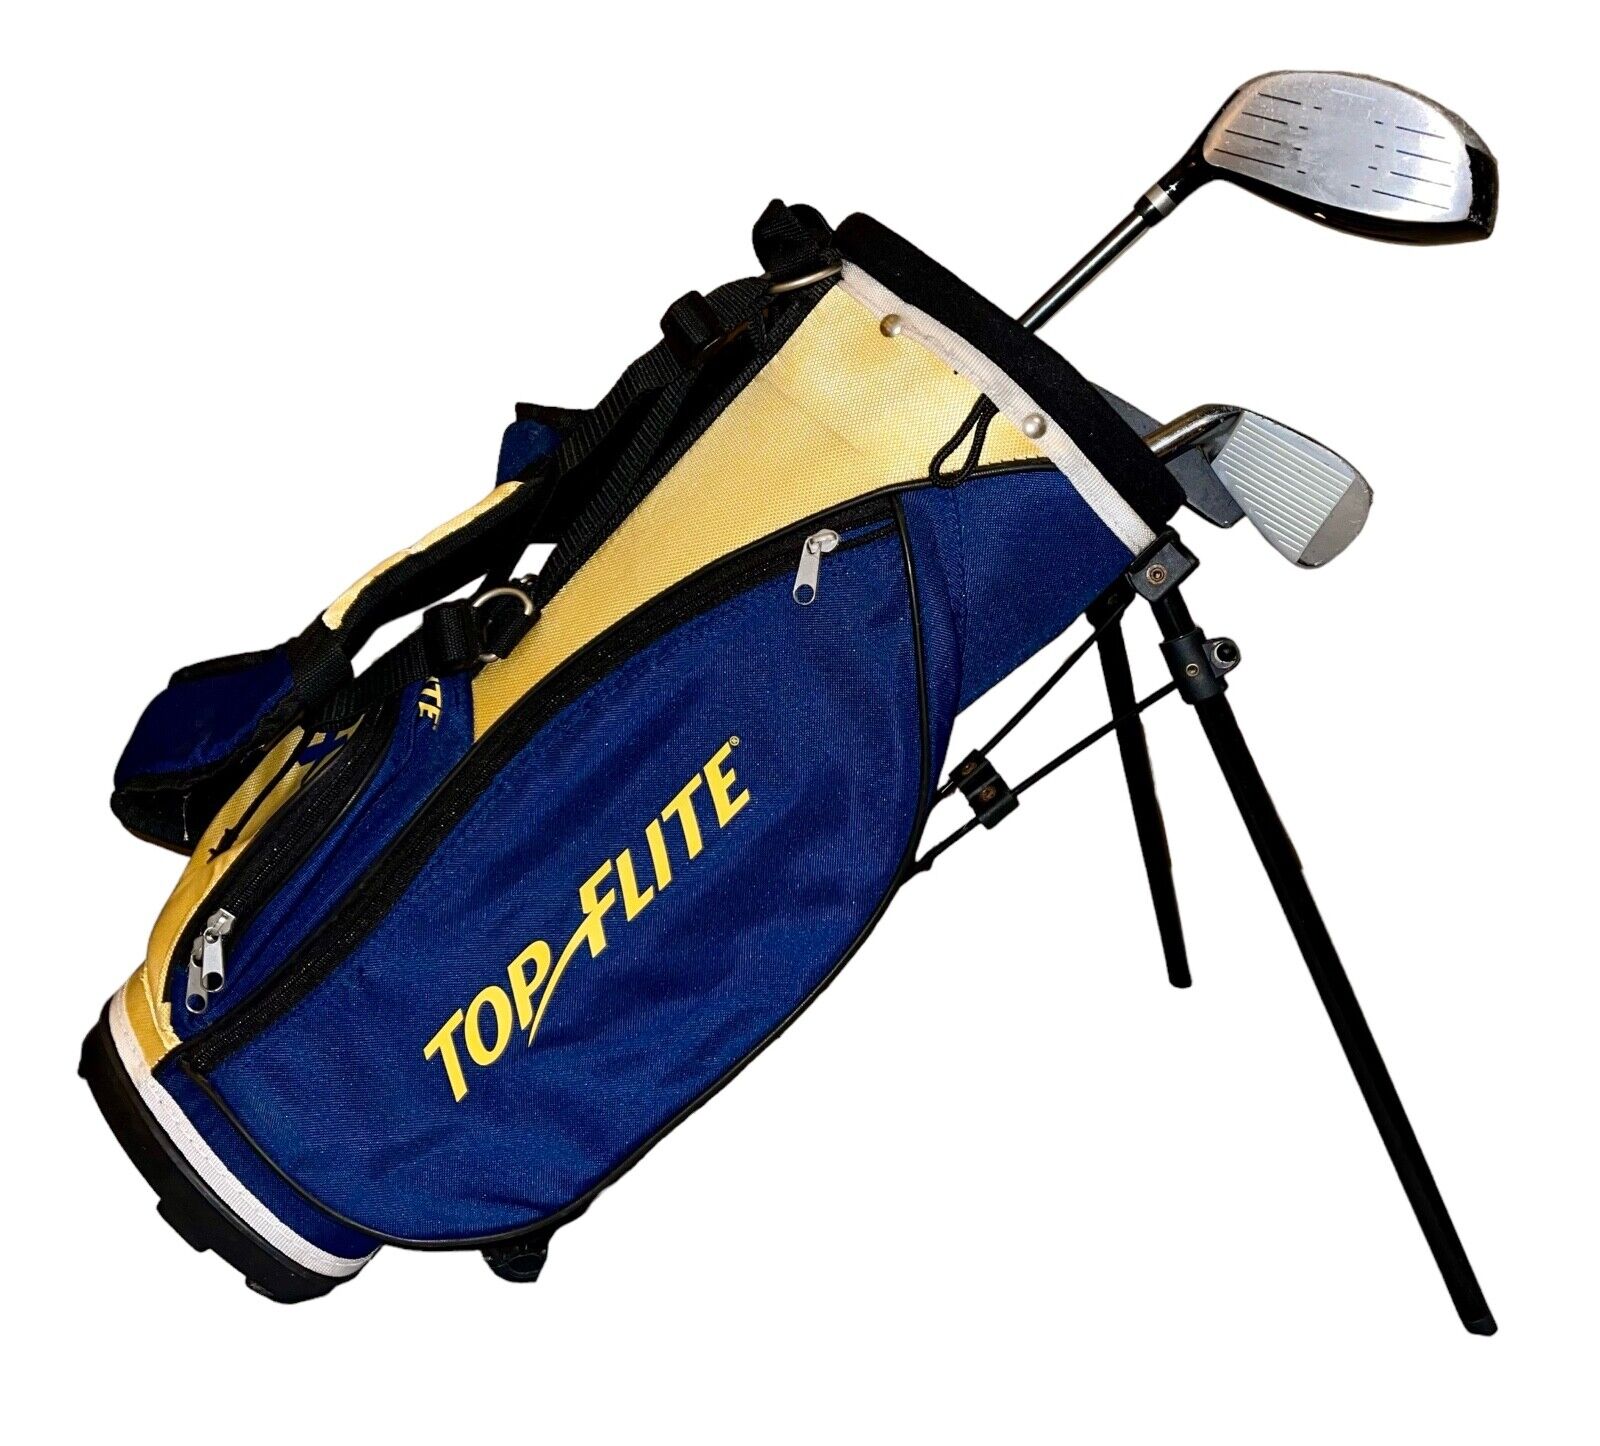 top flite xlj youth golf club bag with 3 clubs. Driver, 9,pw. 3 way/3pocket bag